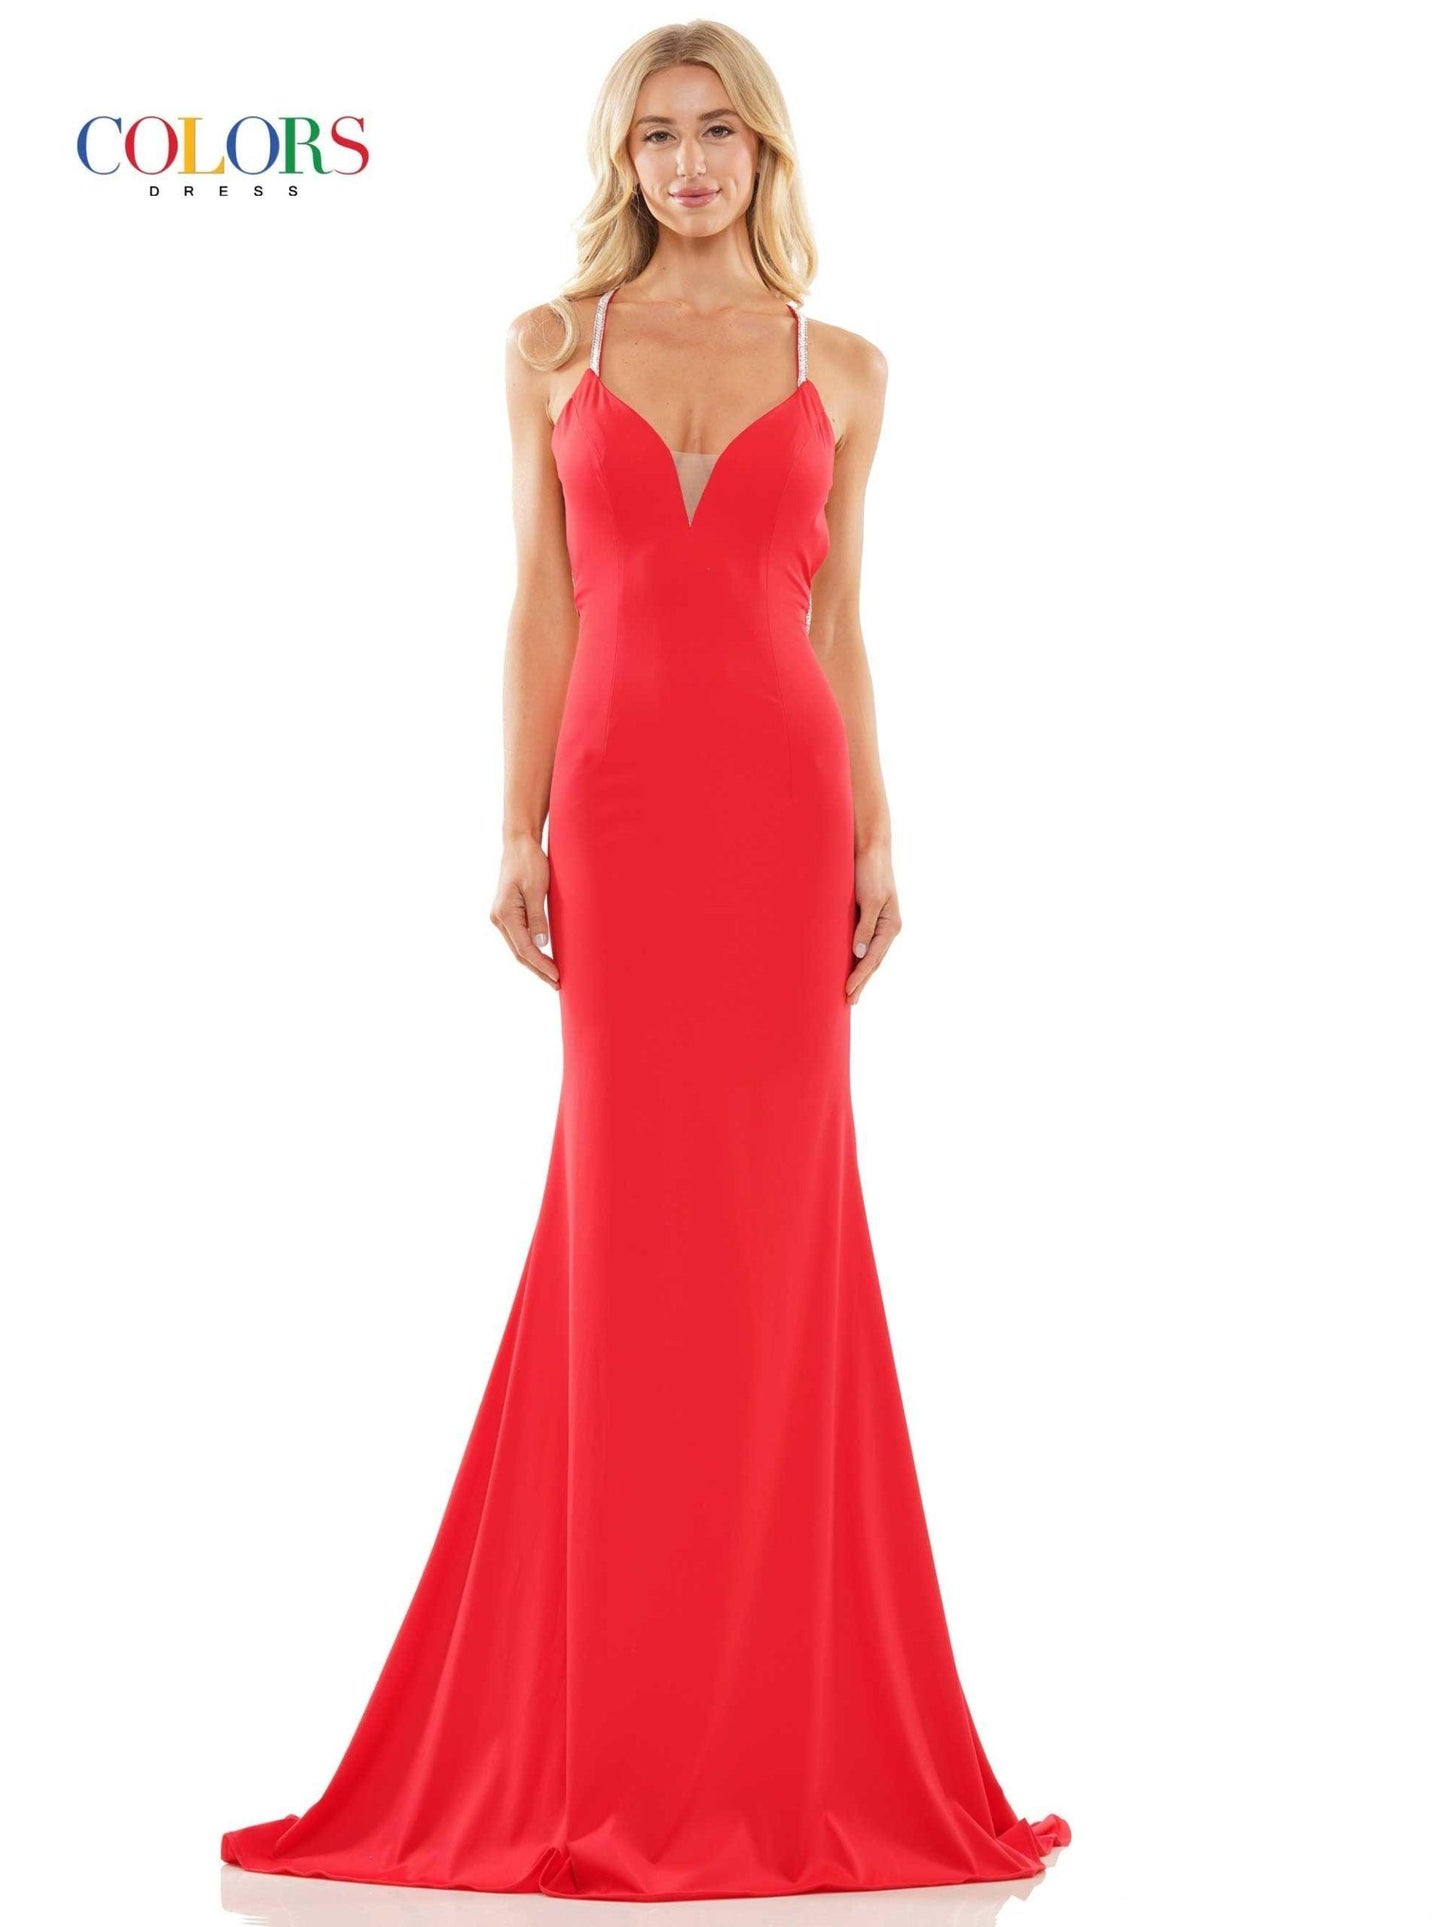 Colors Long Spaghetti Strap Prom Dress 2974 - The Dress Outlet